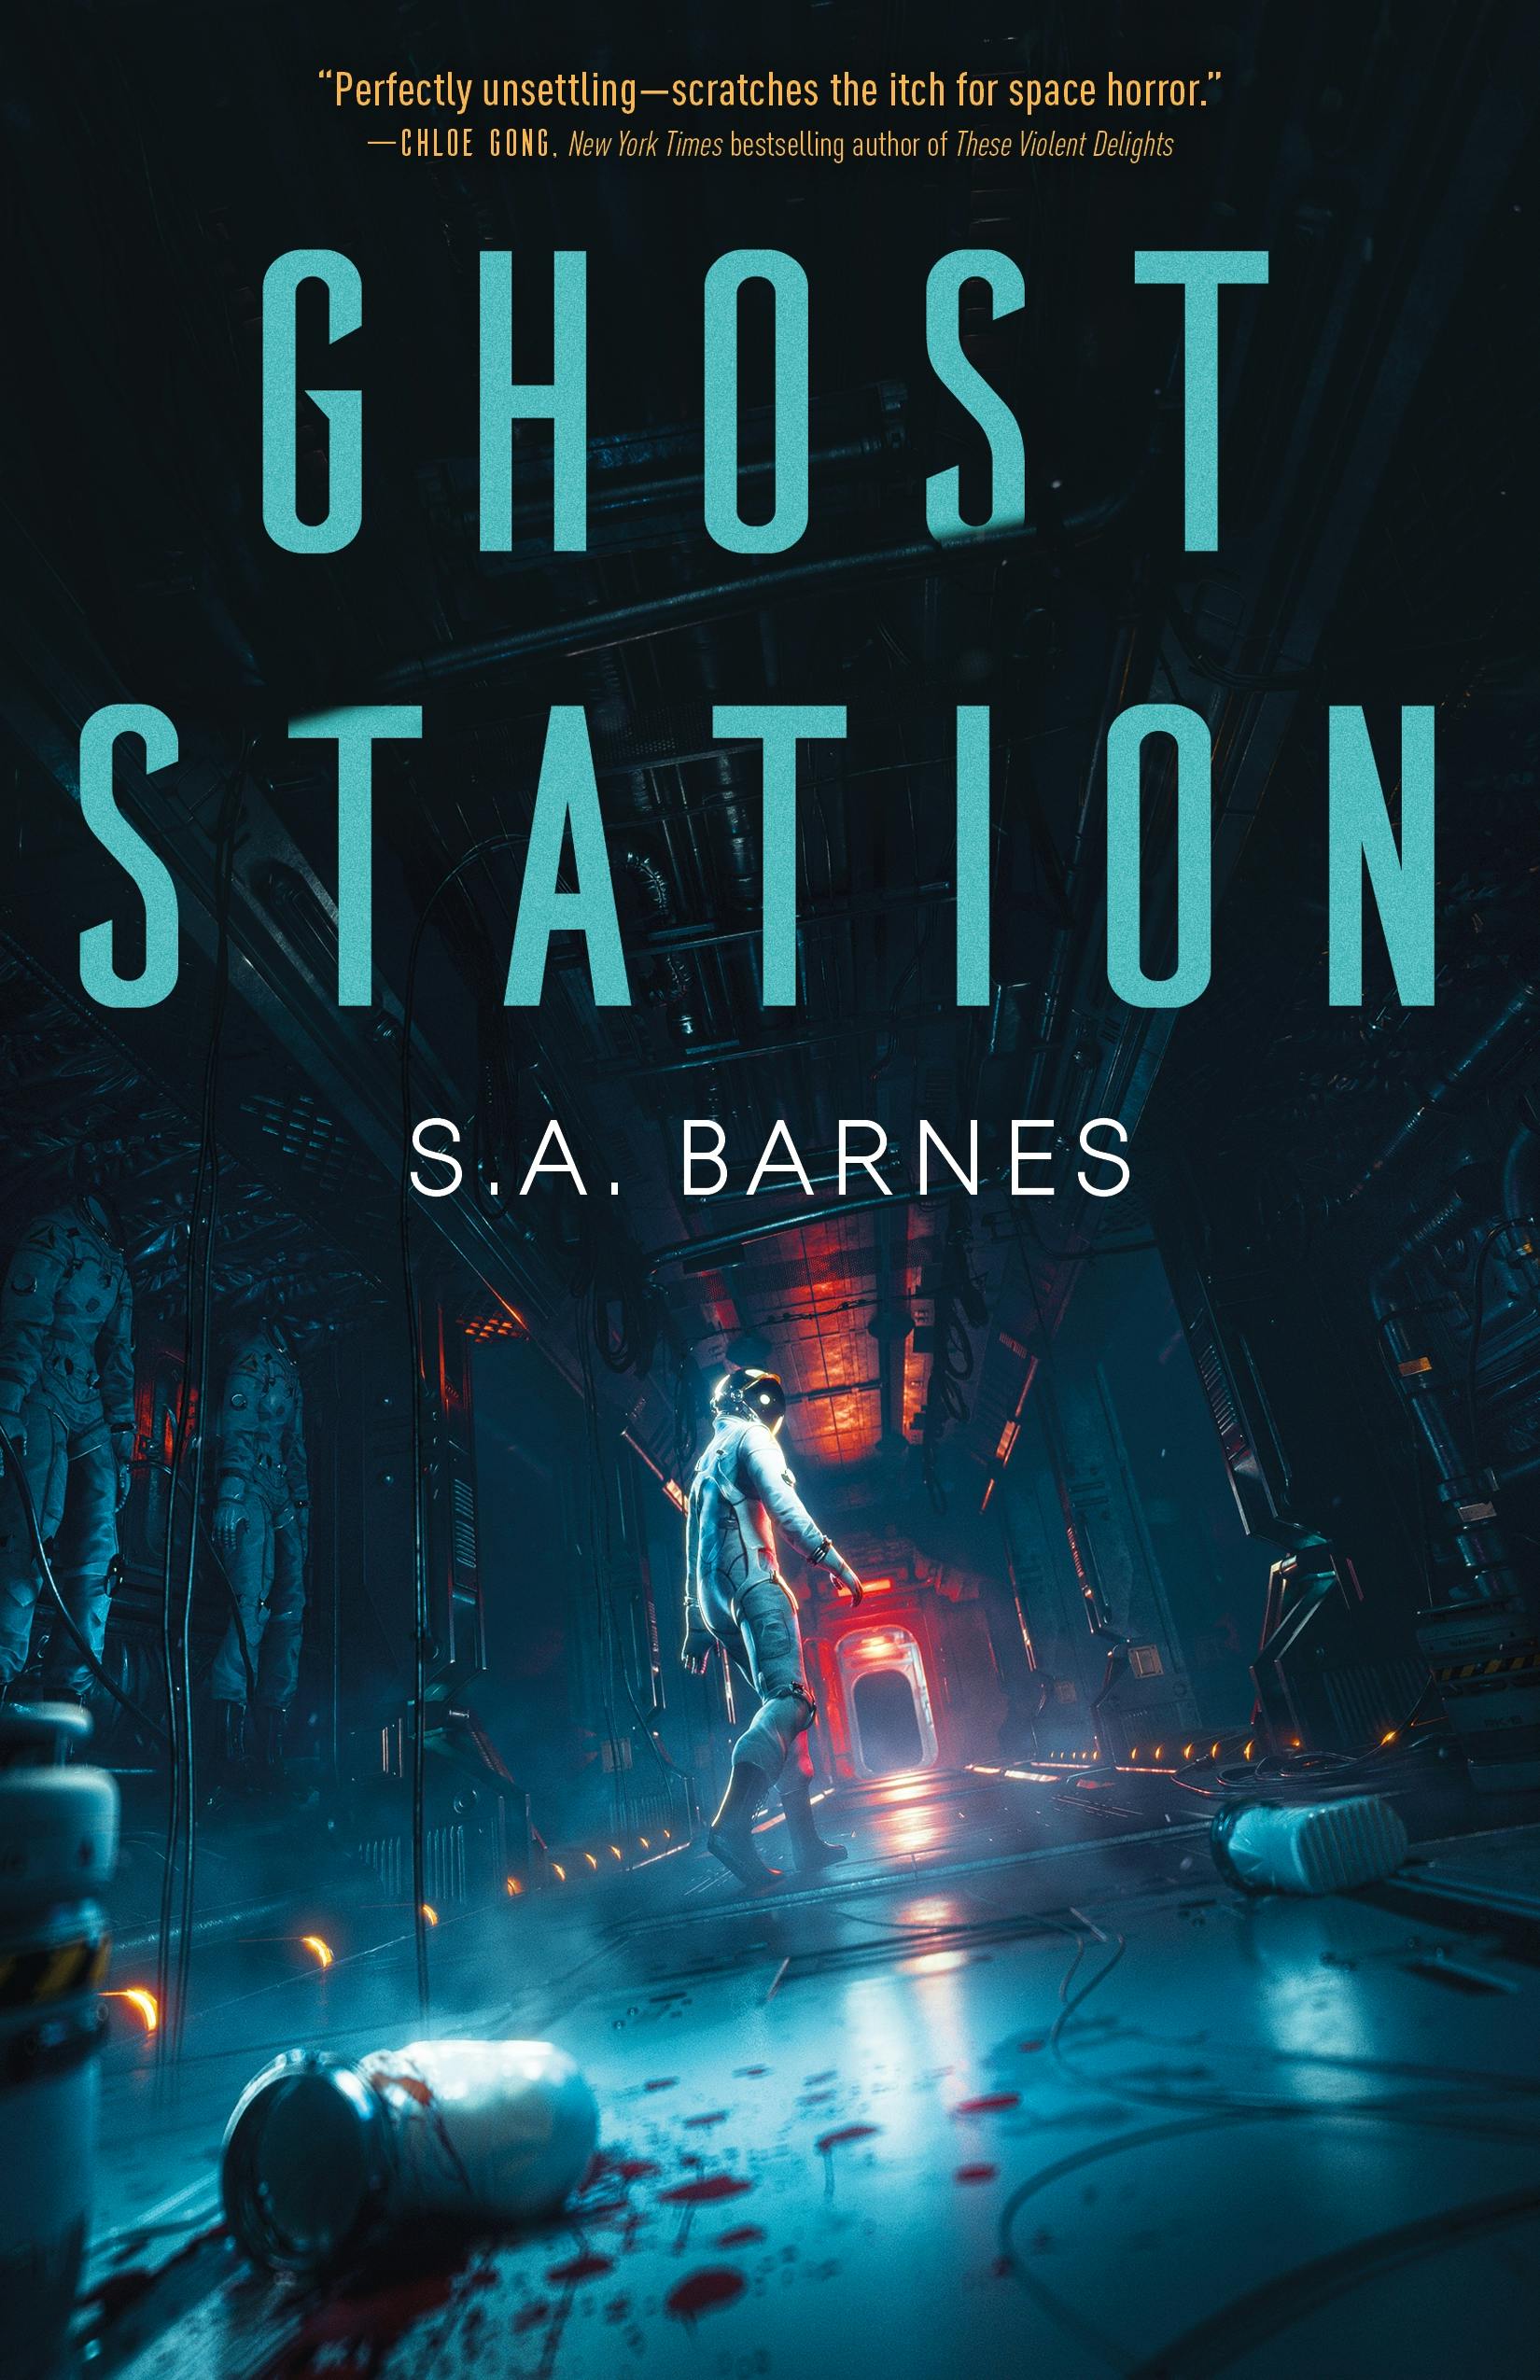 Cover for the book titled as: Ghost Station